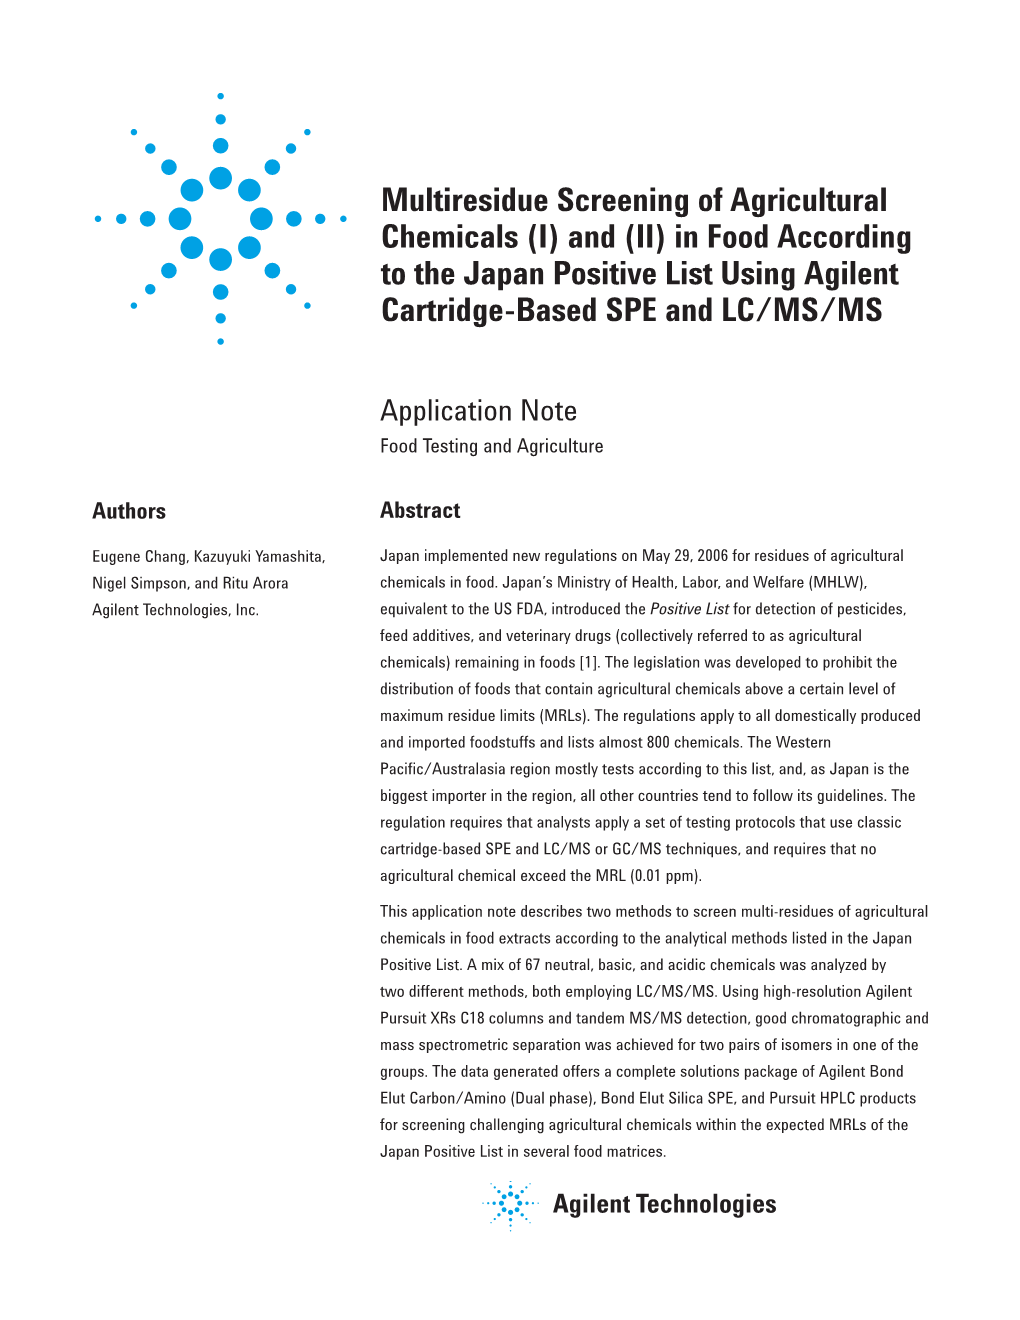 Multiresidue Screening of Agricultural Chemicals (I) and (II) in Food According to the Japan Positive List Using Agilent Cartridge-Based SPE and LC/MS/MS